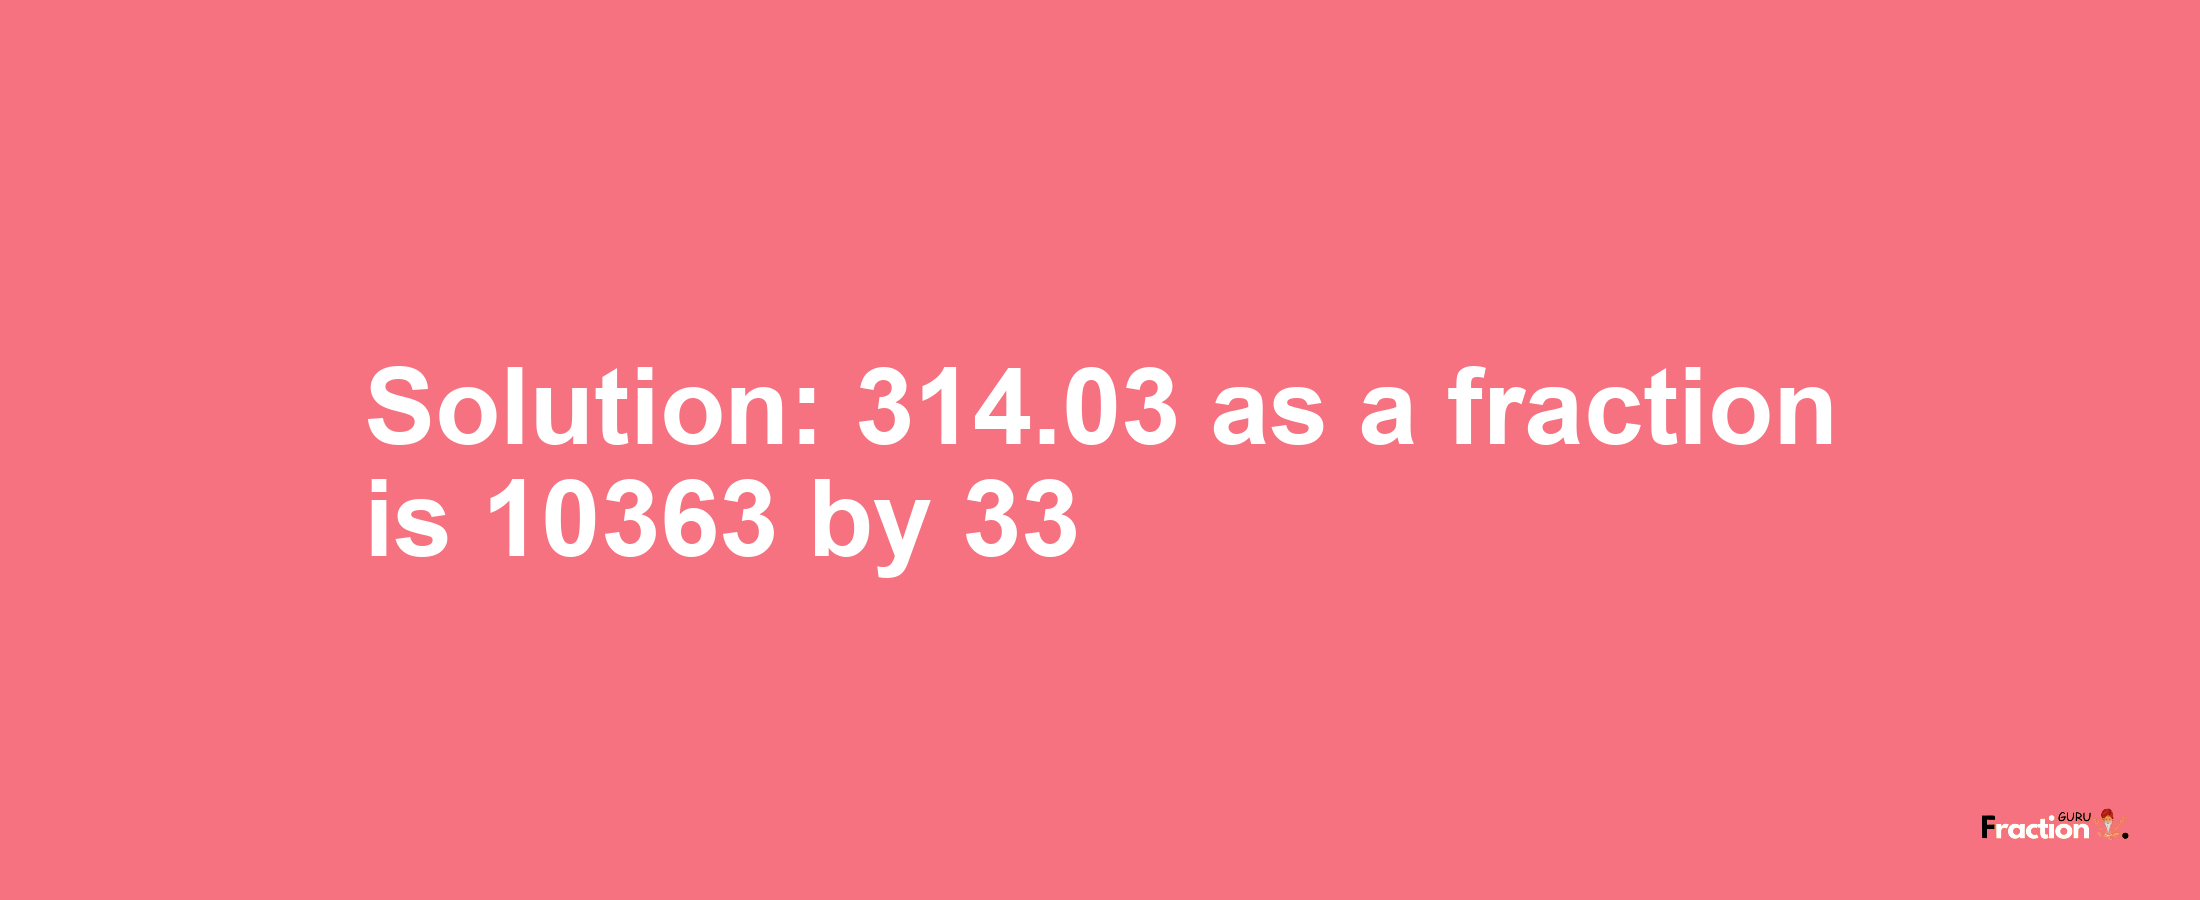 Solution:314.03 as a fraction is 10363/33